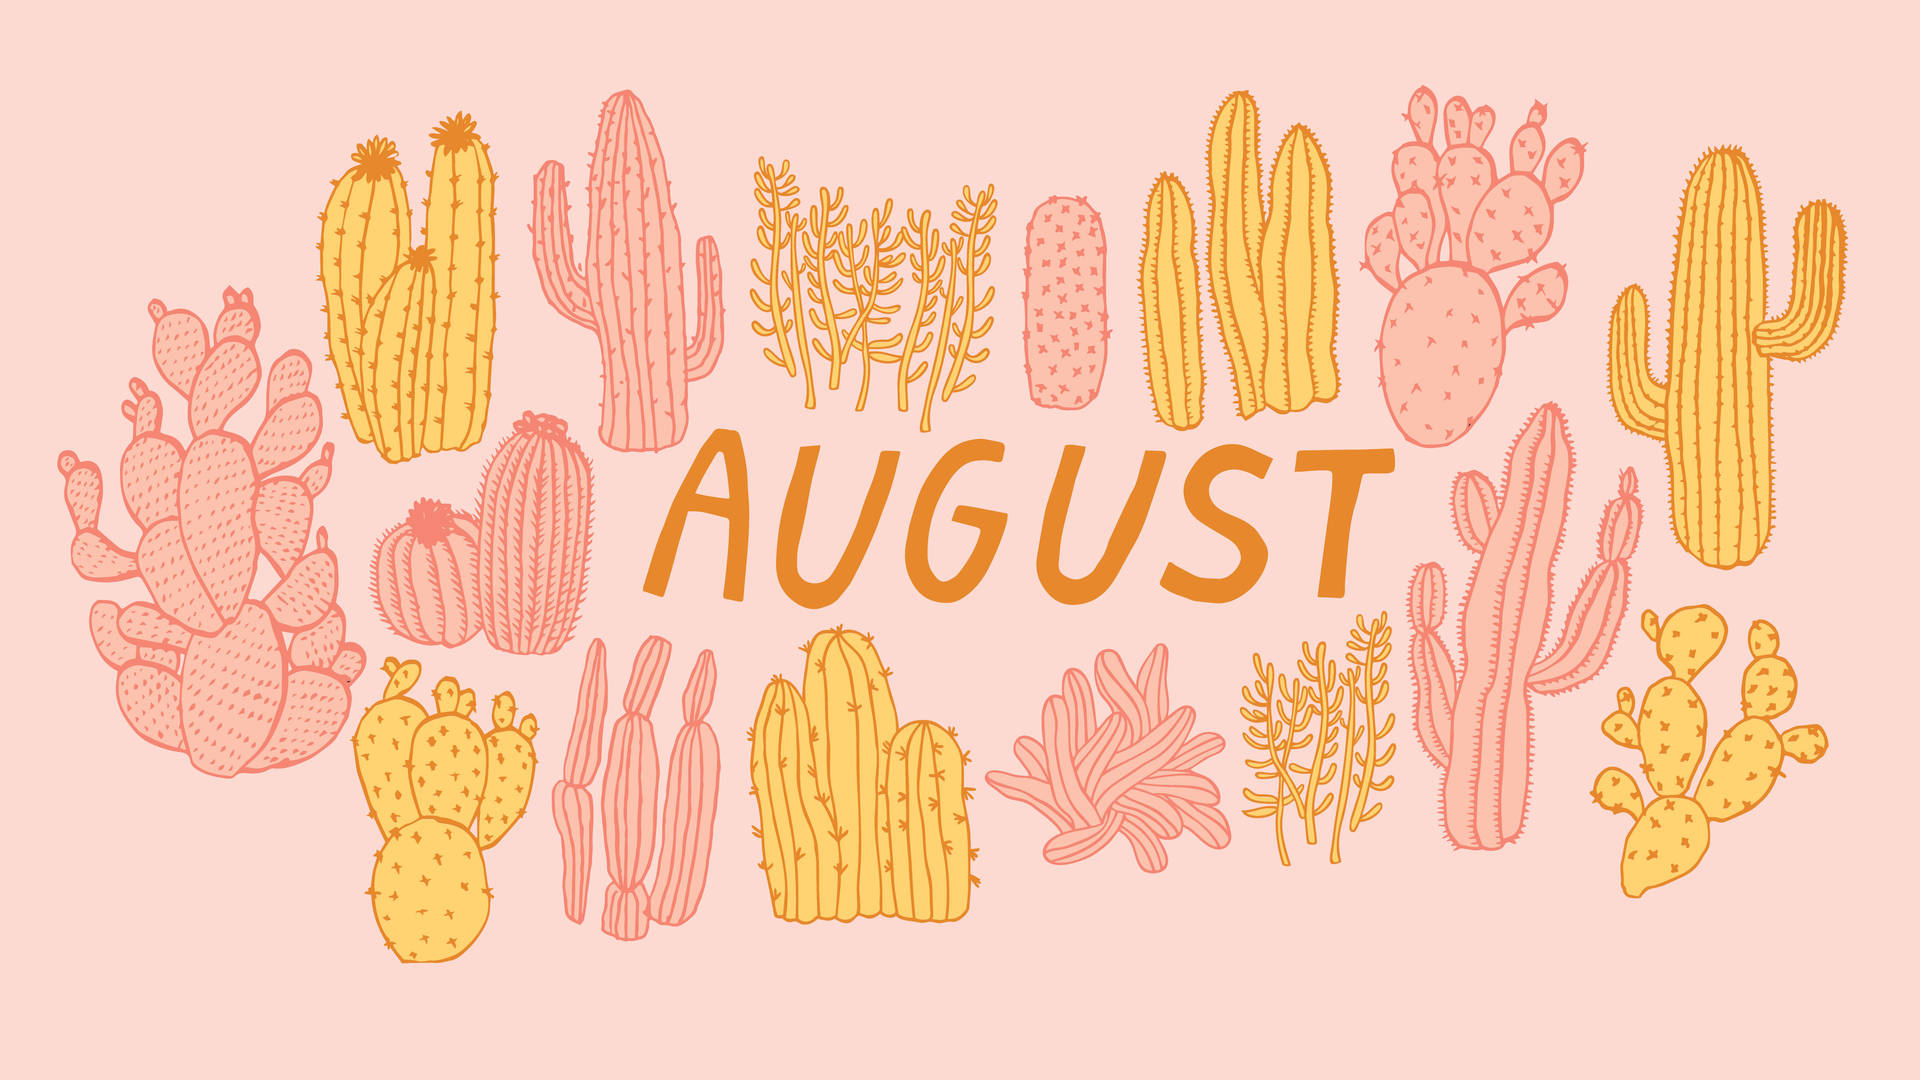 Celebrate August with the Colorful Cactus Wallpaper